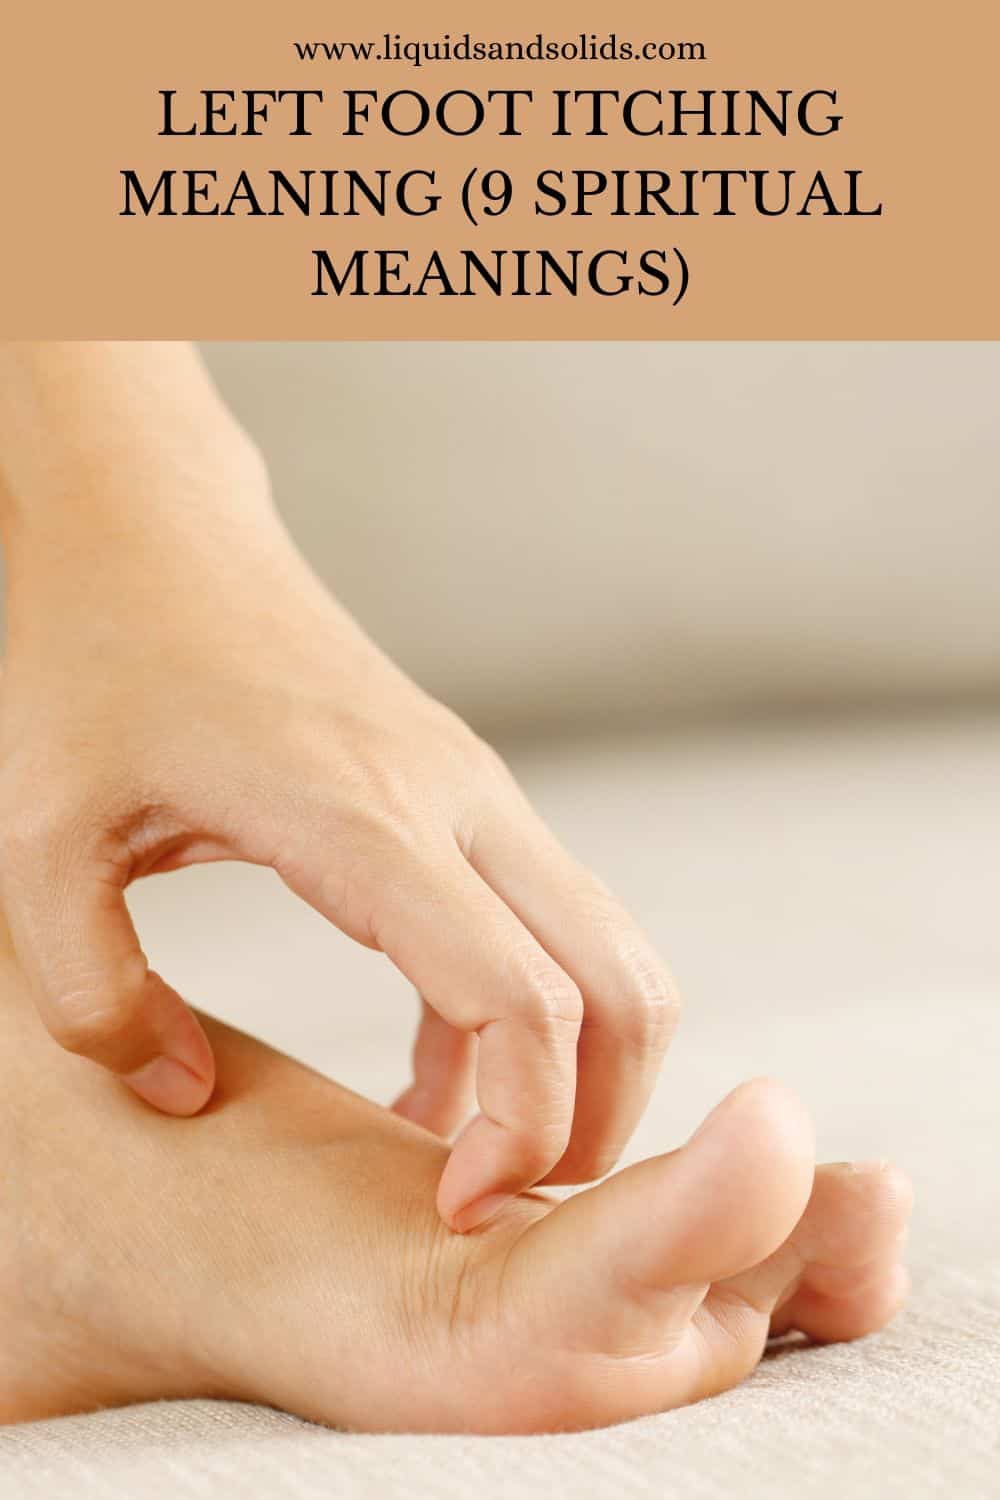 Left Foot Itching Meaning (9 Spiritual Meanings)